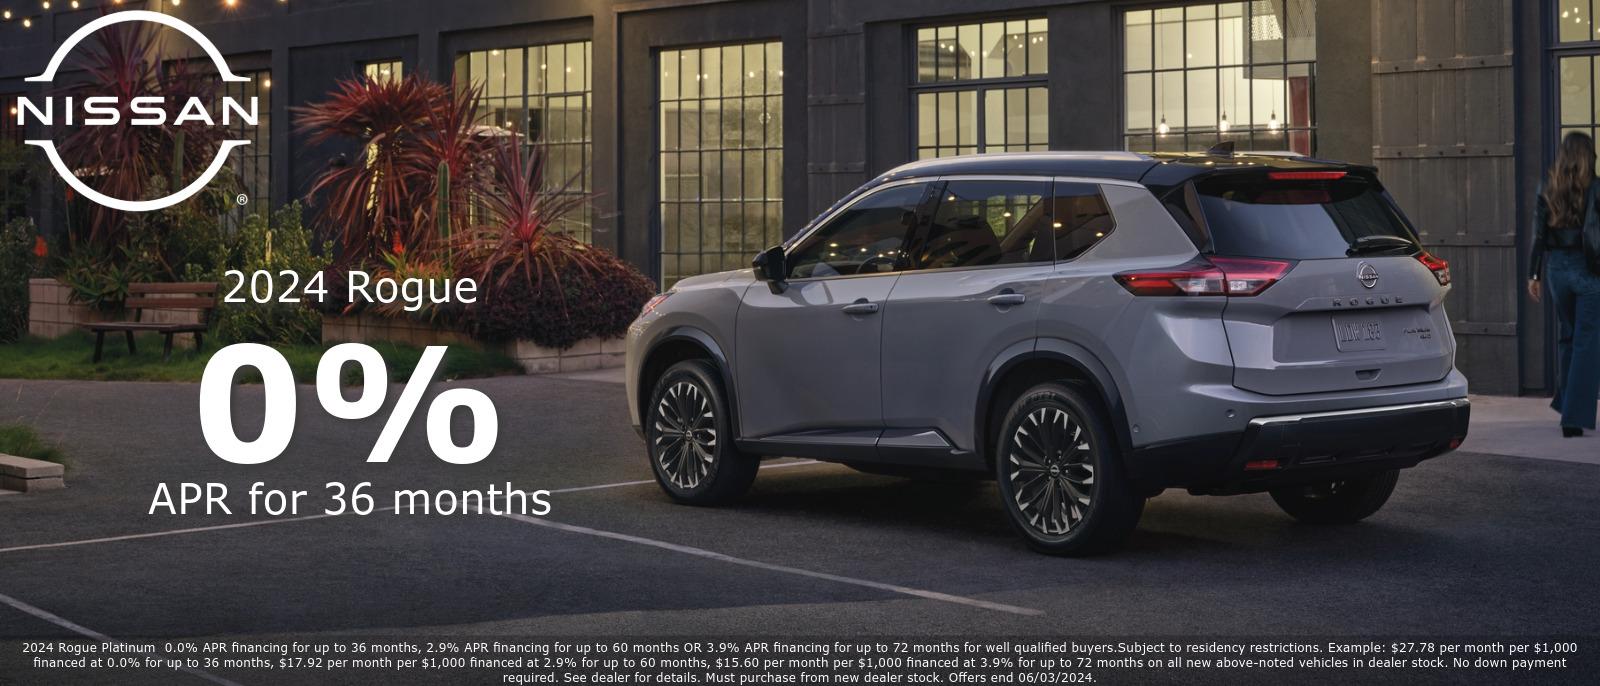 2024 Rogue - 0% APR for 36 months